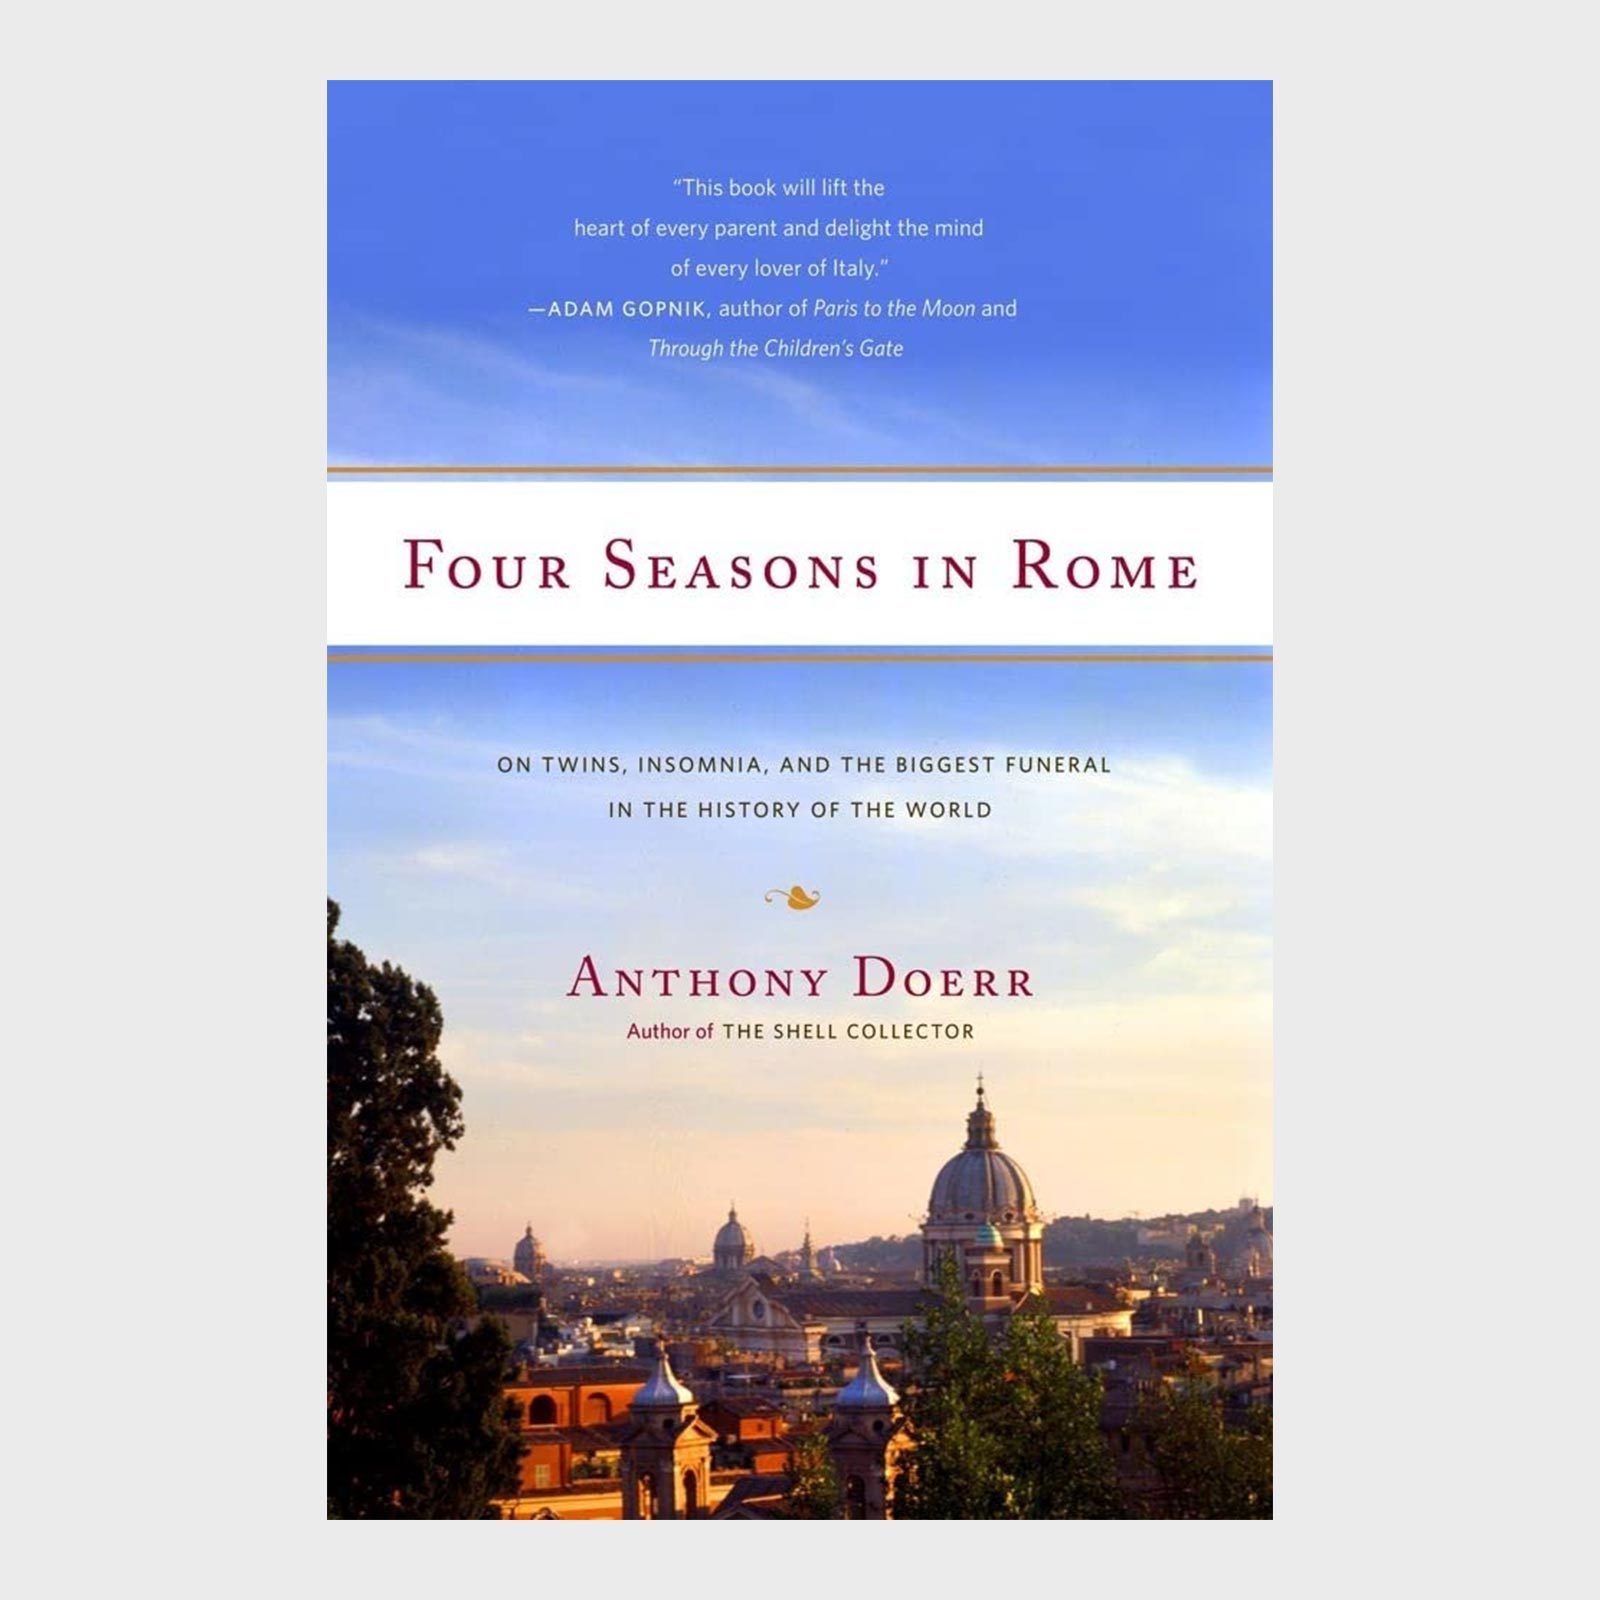 <h3><em>Four Seasons in Rome </em>by Anthony Doerr</h3> <p><strong>Setting:</strong> Rome, Italy</p> <p>Anthony Doerr's 2007 <em><a href="https://www.amazon.com/Four-Seasons-Rome-Insomnia-Biggest/dp/141657316X" rel="noopener noreferrer">Four Seasons in Rome</a></em> will whisk you away to <a href="https://www.rd.com/article/best-time-to-travel-to-italy/">Italy's</a> ancient capital in an instant. During his sojourn at a writing studio in Rome, Doerr drank deeply from Rome's culture, food and daily life. He plumbed the depths of the city's history and spent days traipsing up and down its countless alleys and streets. He visited temples and attended a vigil for Pope John Paul II. He befriended his neighborhood storekeepers and bakers. He immersed himself this way for an entire year, then wrote one of the best books all about it so you could experience it too.</p> <p class="listicle-page__cta-button-shop"><a class="shop-btn" href="https://www.amazon.com/Four-Seasons-Rome-Insomnia-Biggest/dp/141657316X">Shop Now</a></p>